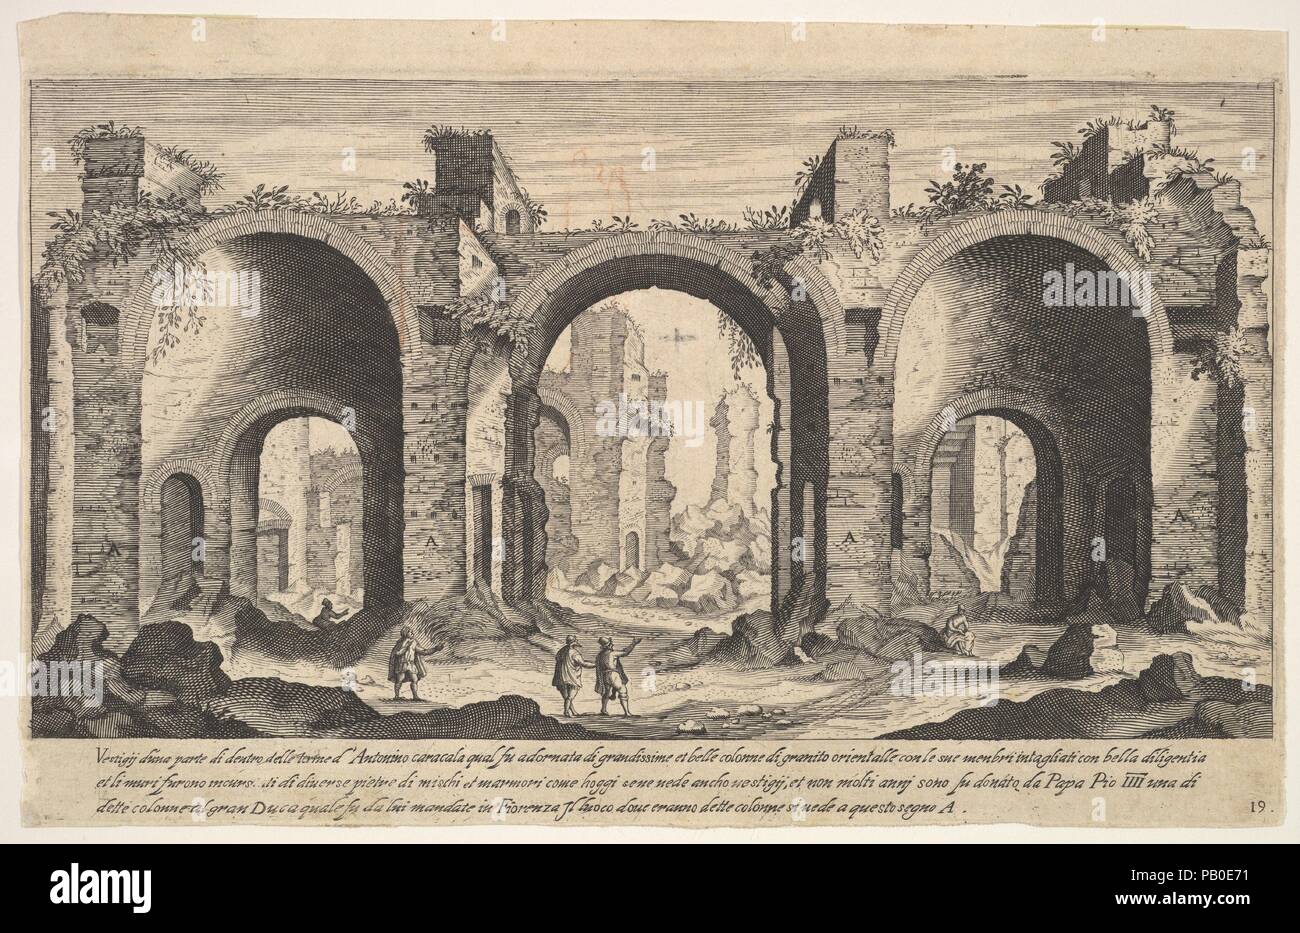 Plate 19: view of the Baths of Caracalla, indicating with inscribed letter 'A' the places from which columns were reportedly taken by Pope Pius IV to be sent to the Grand Duke of Florence, from the series 'Ruins of the antiquity of Rome, Tivoli, Pozzuoli, and other places' (Vestigi della antichità di Roma, Tivoli, Pozzvolo et altri luochi). Artist: Aegidius Sadeler II (Netherlandish, Antwerp 1568-1629 Prague); After Etienne DuPérac (French, ca. 1535-1604). Dimensions: Sheet: 6 3/4 x 10 7/16 in. (17.1 x 26.5 cm). Series/Portfolio: Ruins of the antiquity of Rome, Tivoli, Pozzuoli, and other plac Stock Photo